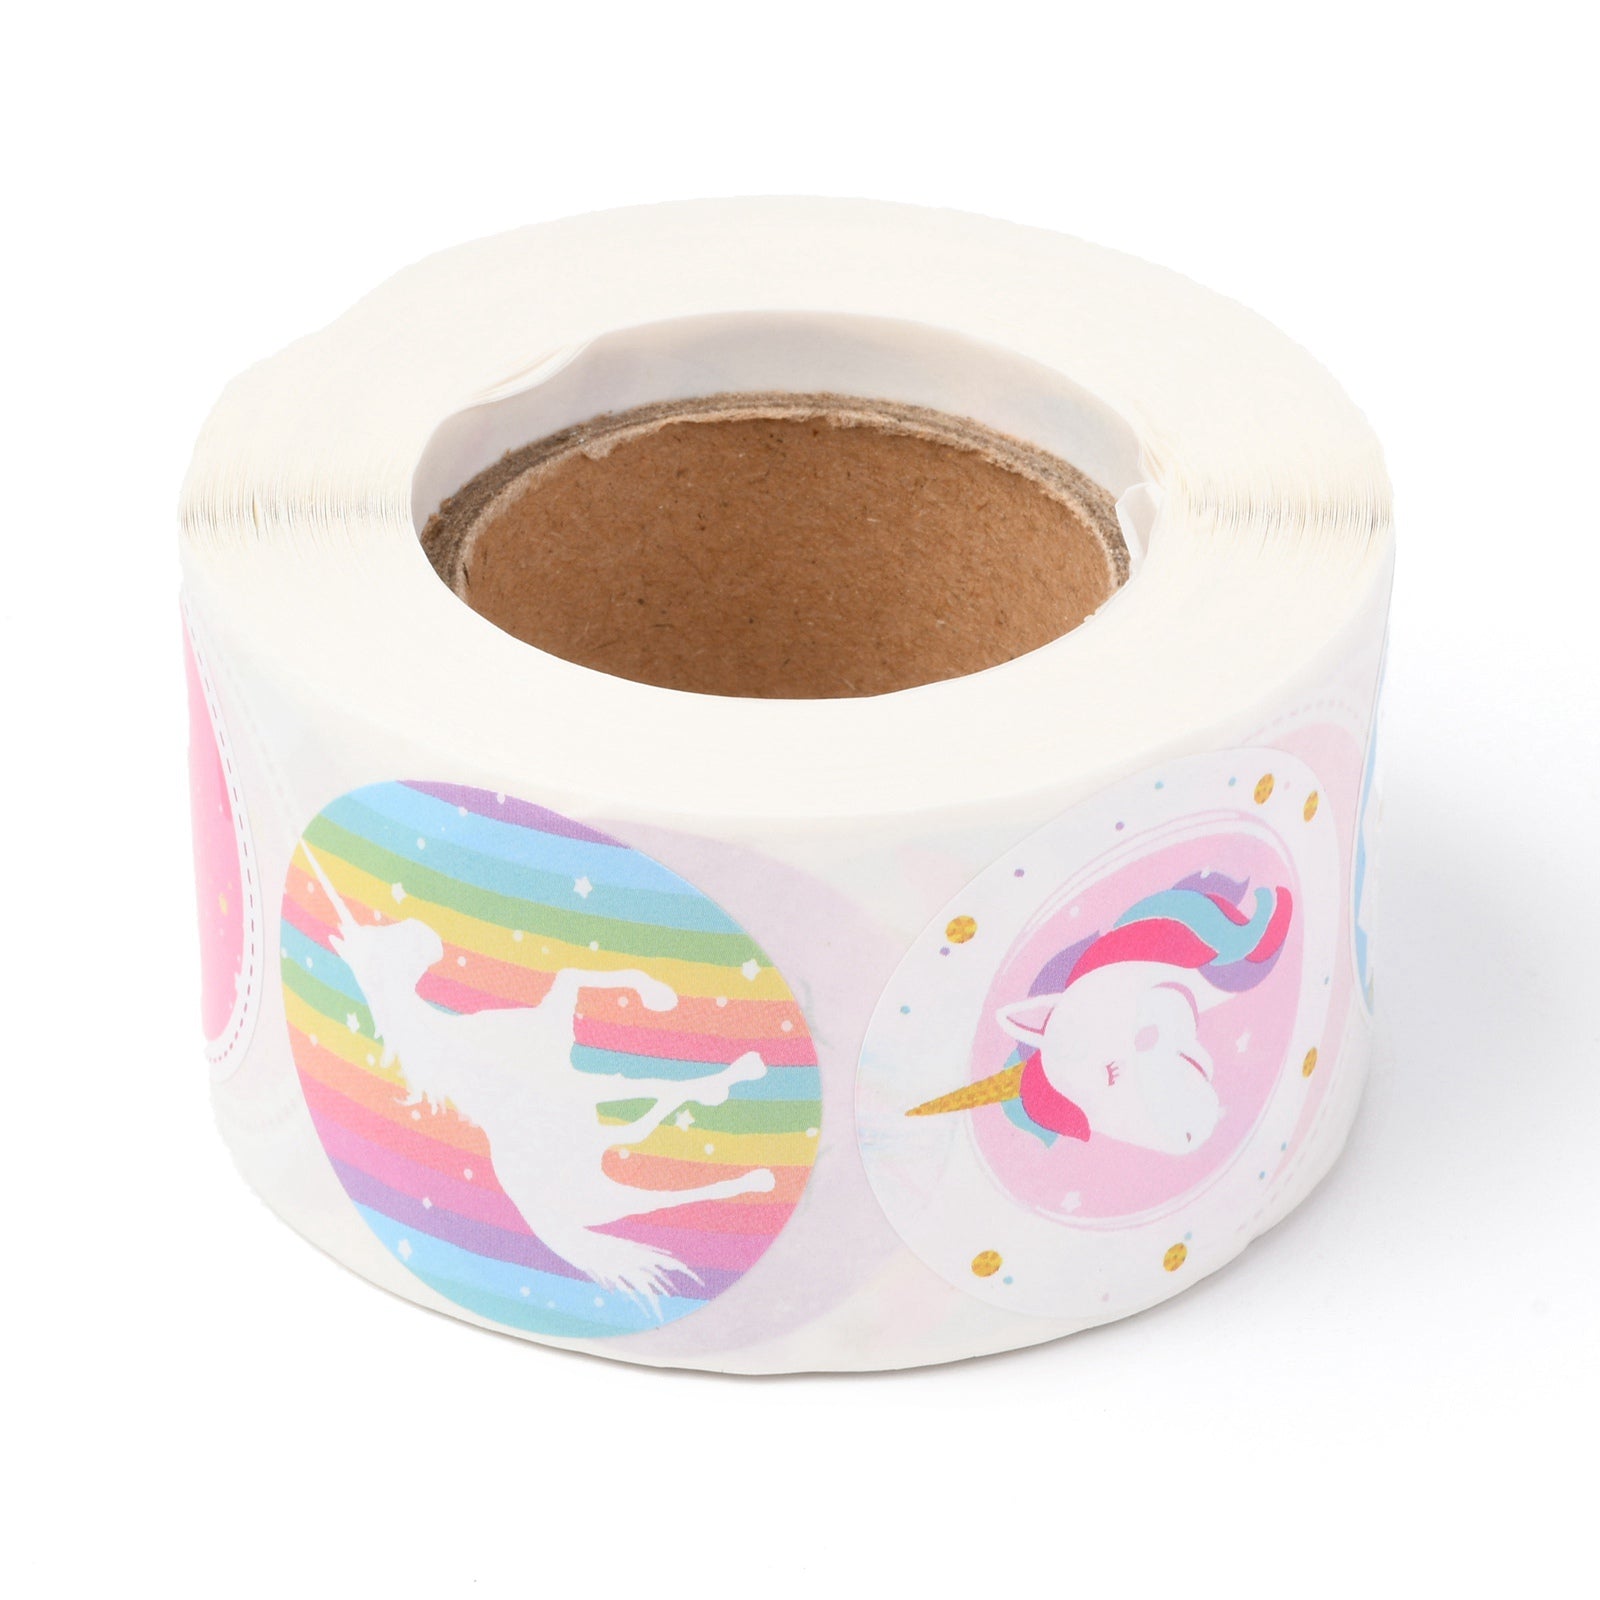 Globleland 8 Styles Unicorn Paper Stickers, Self Adhesive Roll Sticker Labels, for Envelopes, Bubble Mailers and Bags, Flat Round, Horse Pattern, 2.5cm, about 500pcs/roll